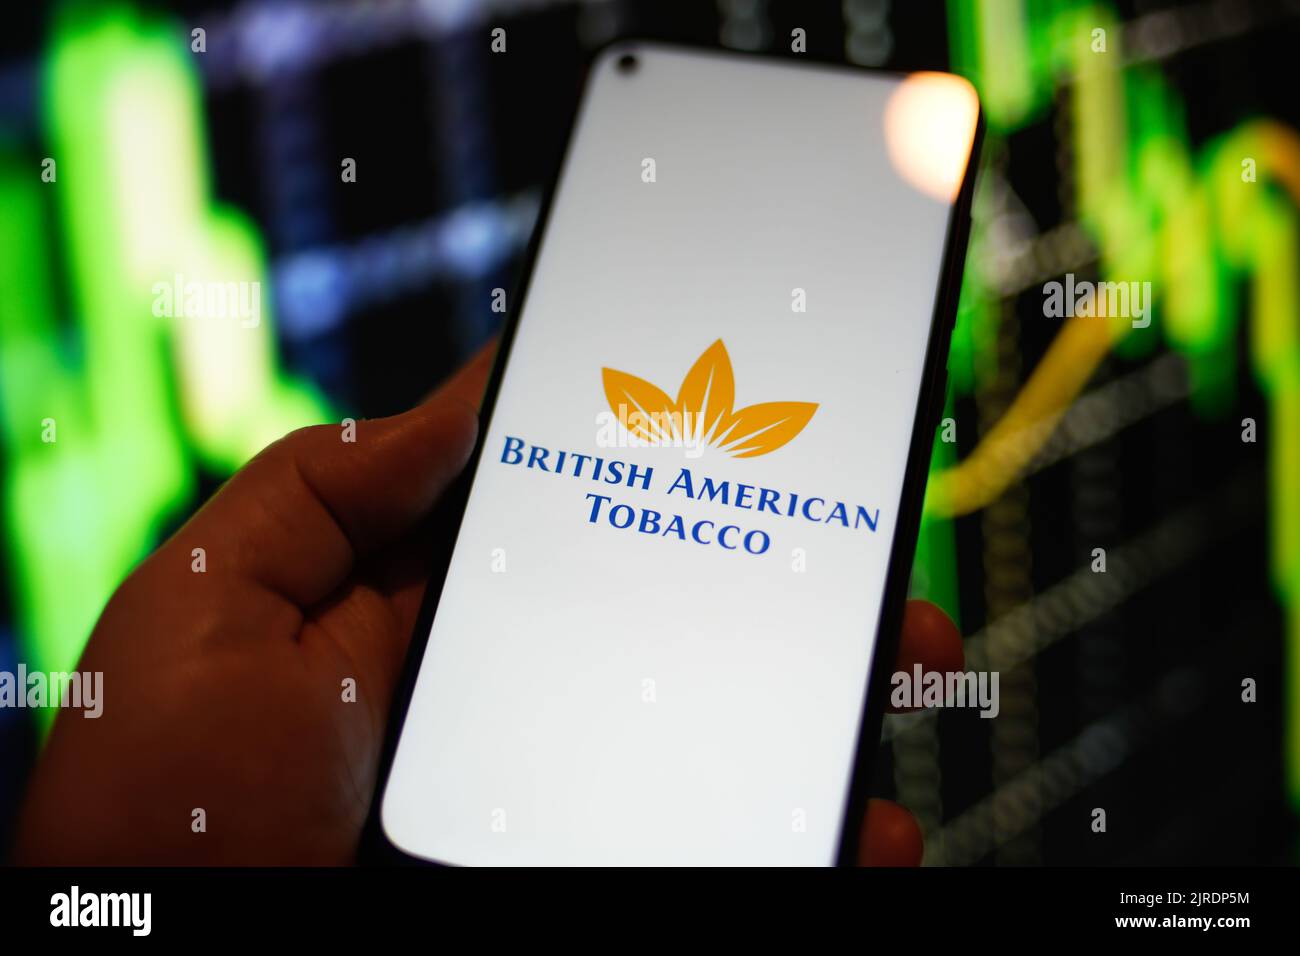 The British American Tobacco logo is seen on a Redmi phone screen in this photo illustration in Warsaw, Poland on 23 August, 2022. (Photo by Jaap Arriens/Sipa USA) Credit: Sipa USA/Alamy Live News Stock Photo